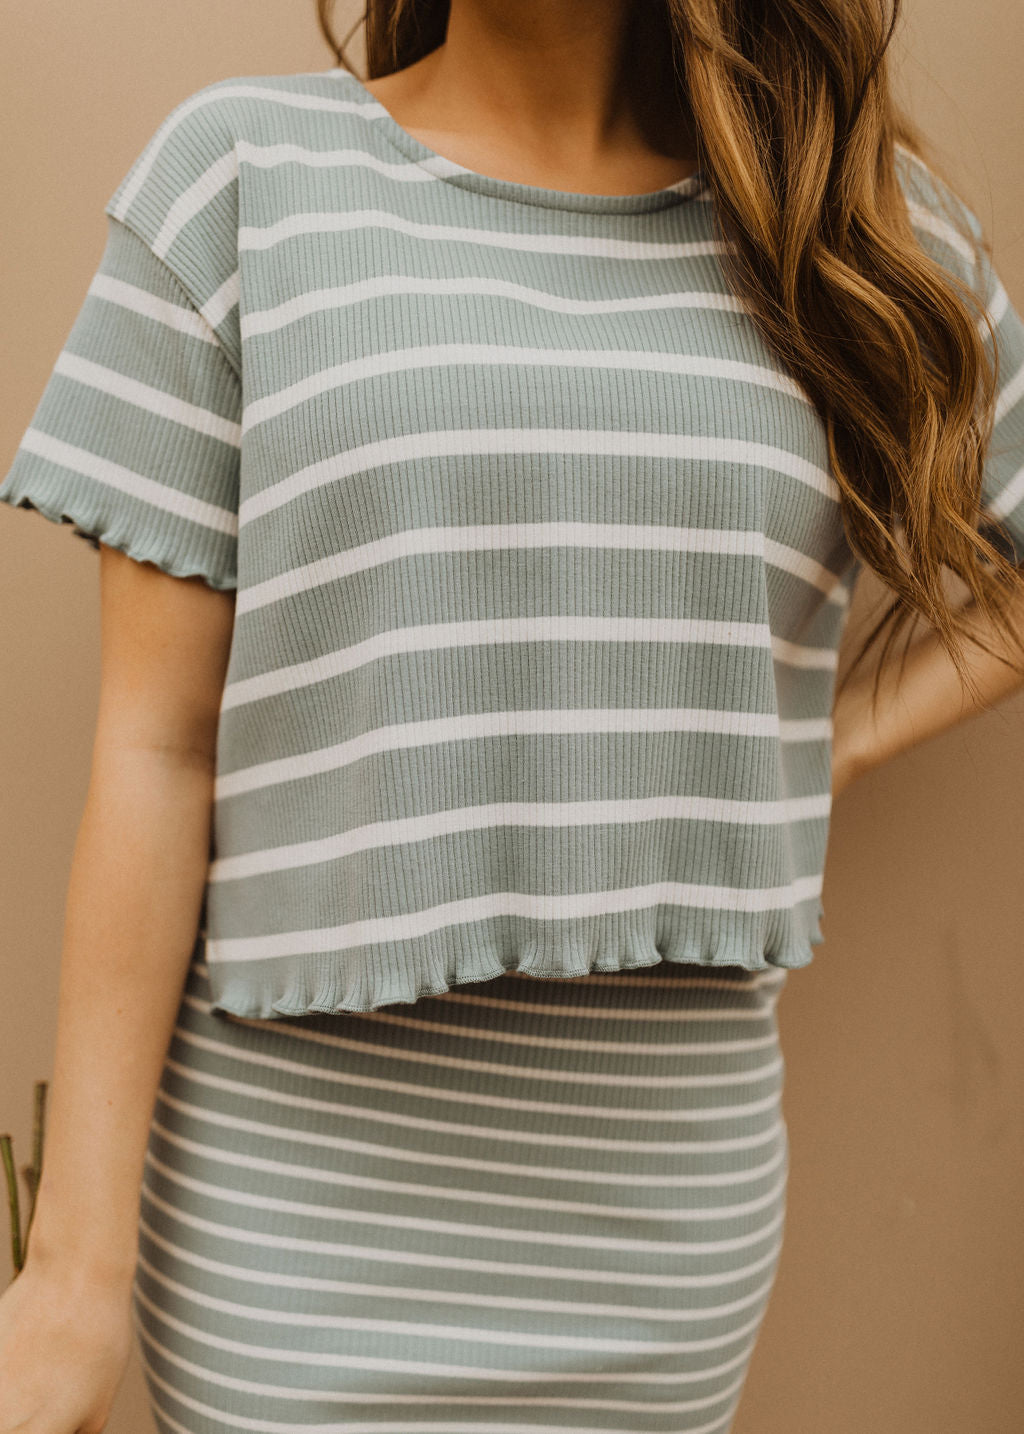 THE KEEP IT COOL STRIPED DRESS SET IN BLUE